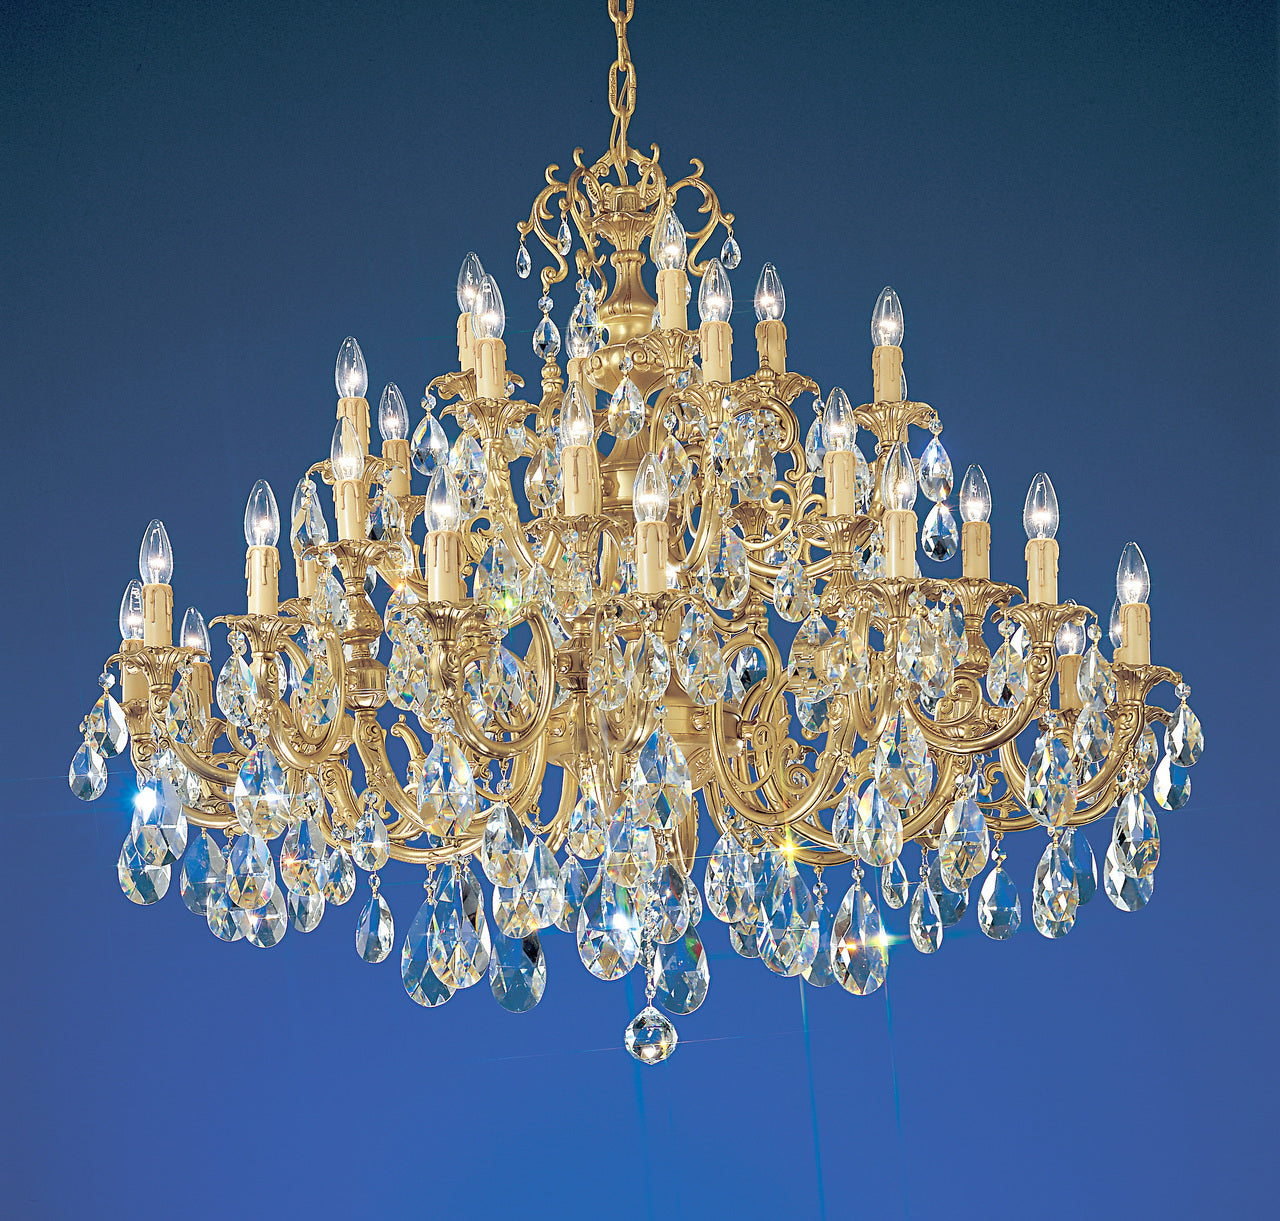 Classic Lighting 5736 SBB S Princeton Crystal/Cast Brass Chandelier in Satin Bronze/Brown Patina (Imported from Spain)